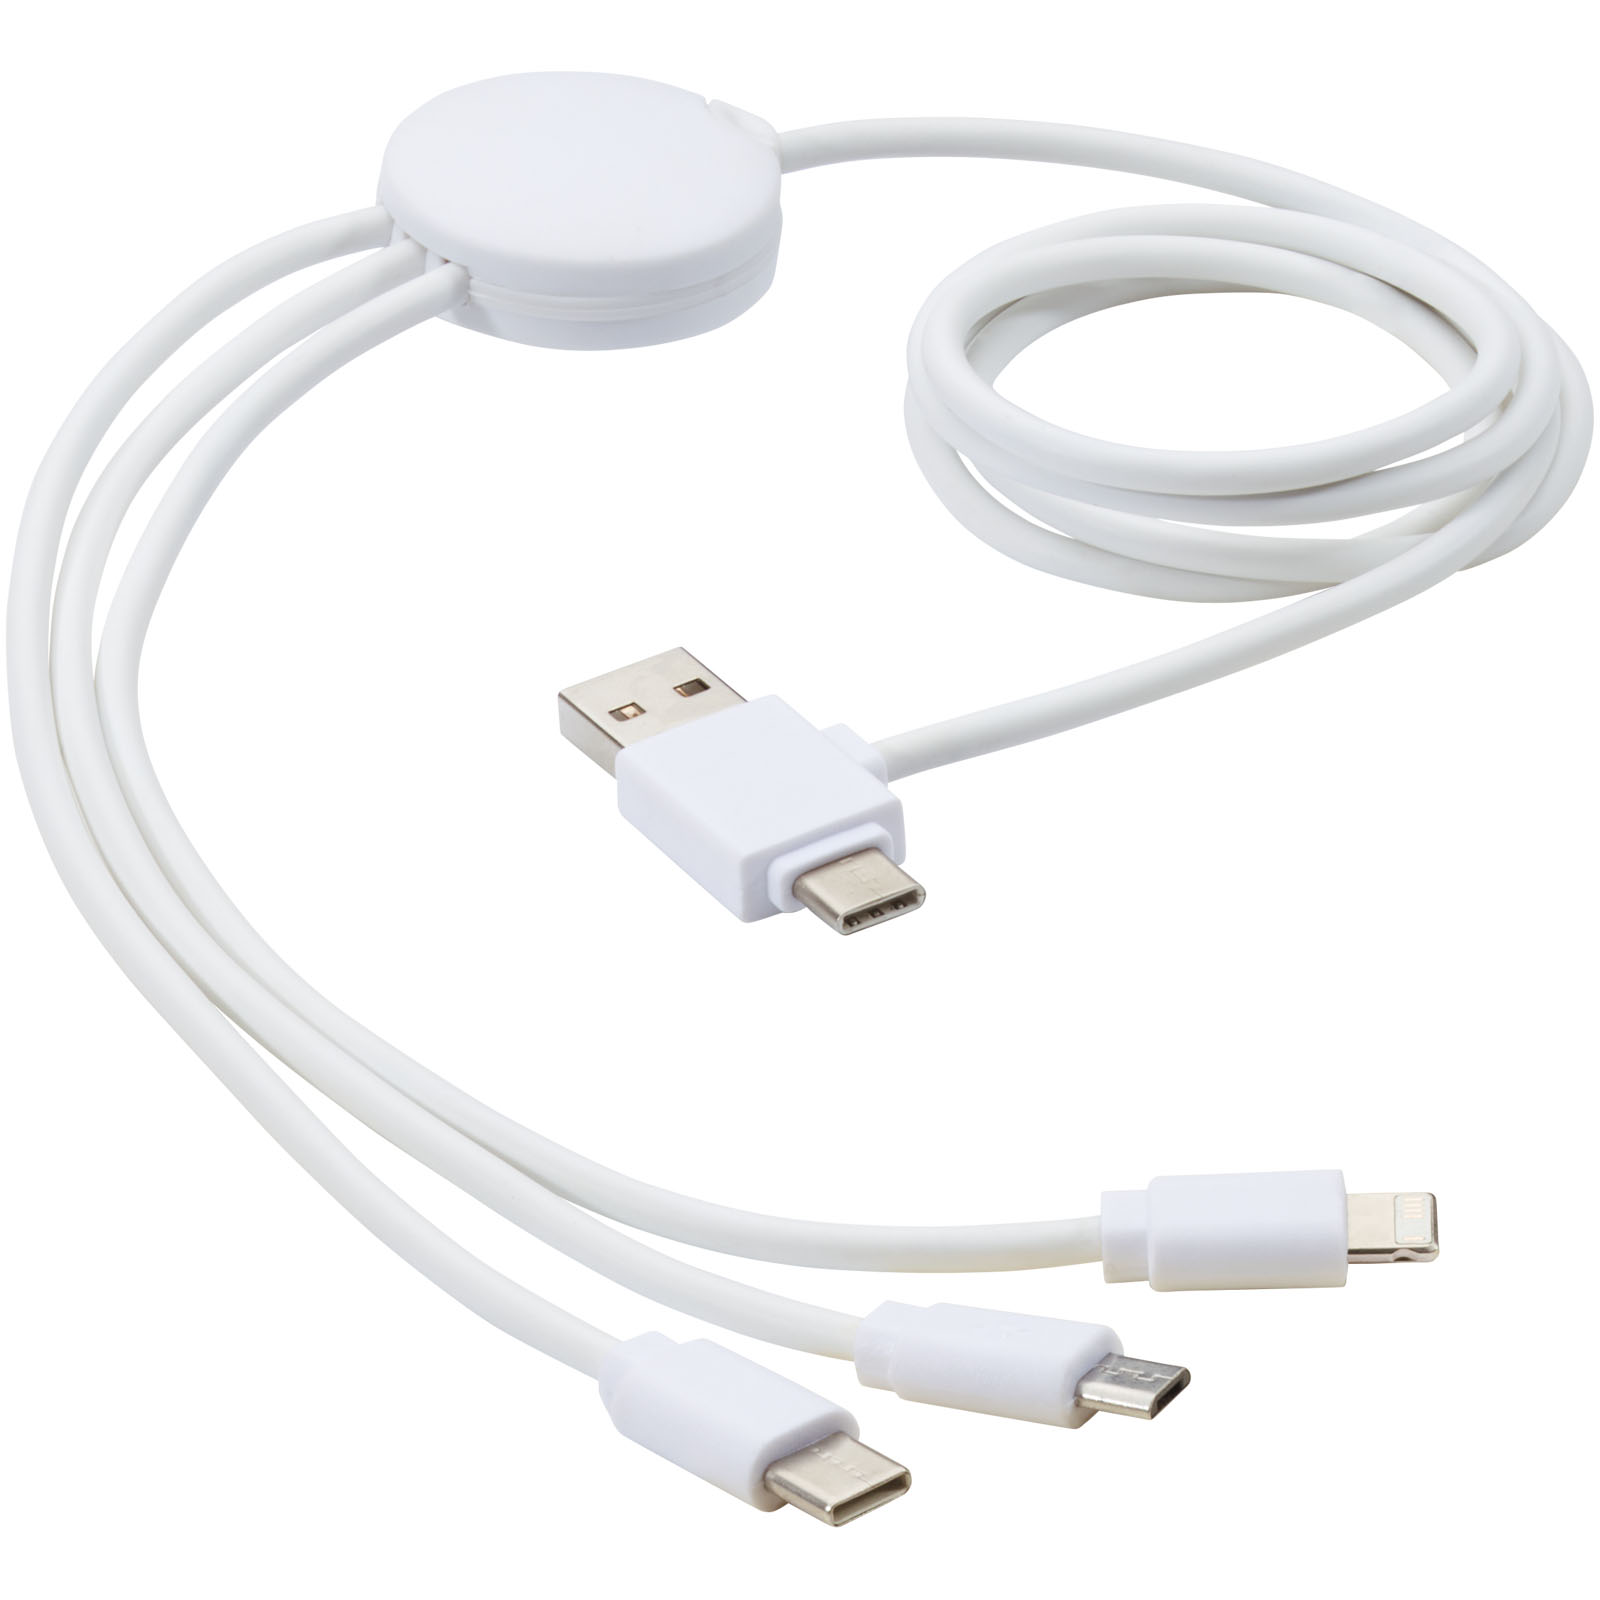 Advertising Cables - Pure 5-in-1 charging cable with antibacterial additive